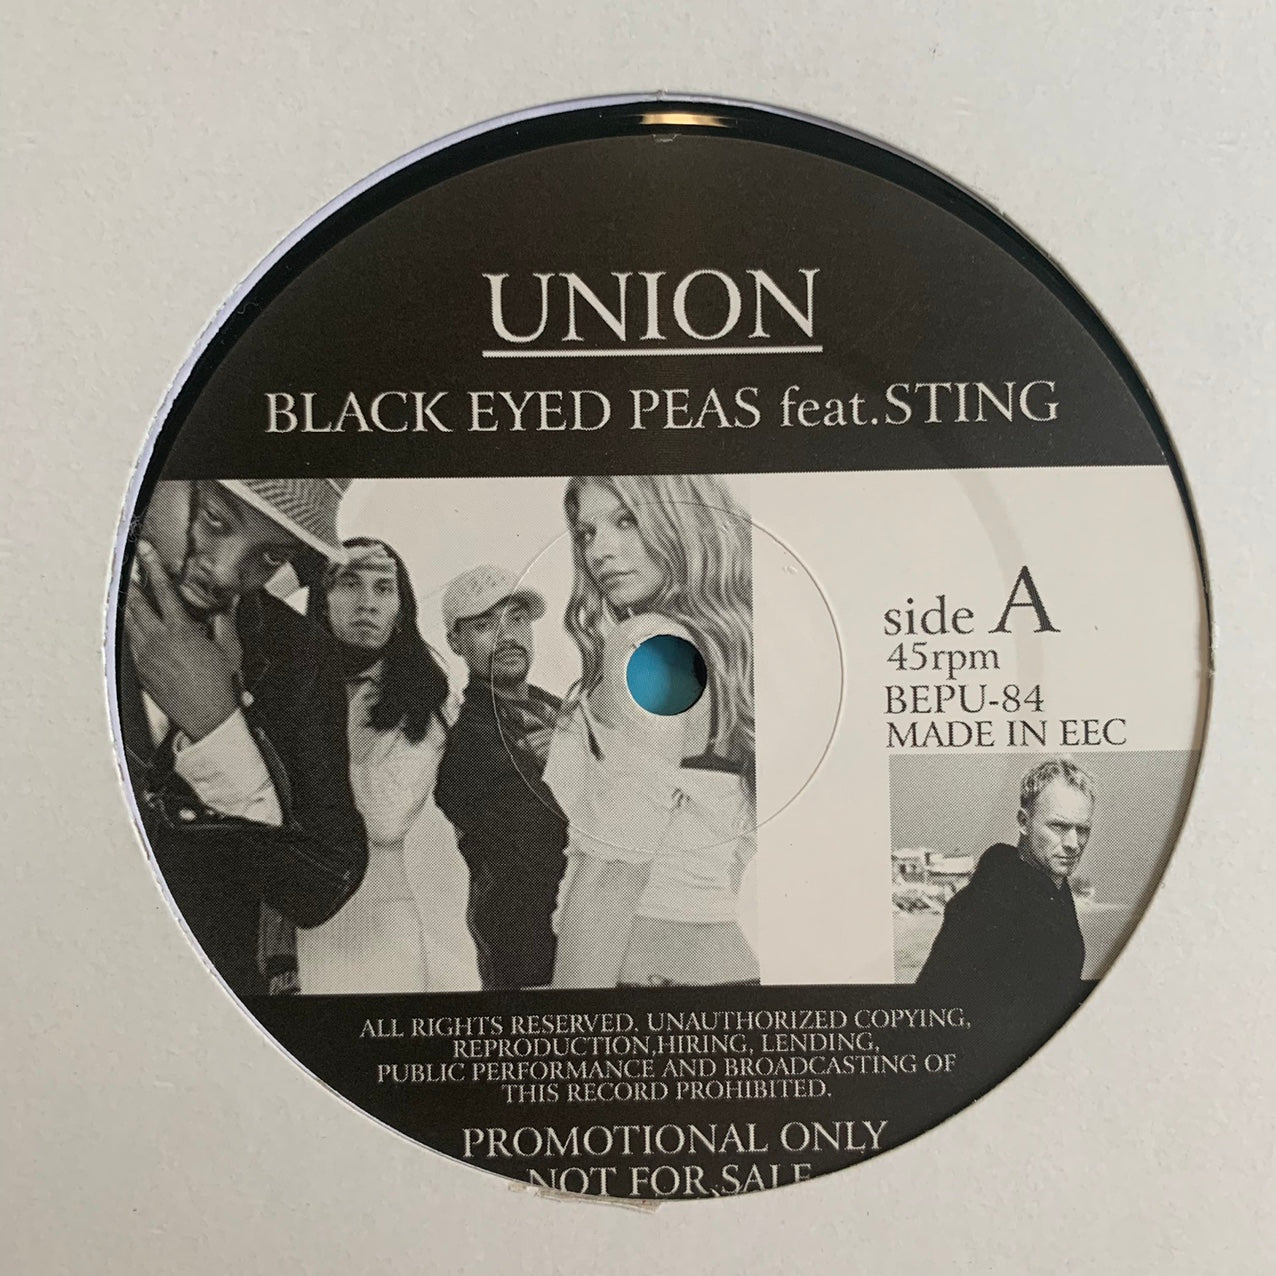 The Black Eyed Peas Feat Sting “Union” / “Dirty Dancing” 3 Track 12inch Vinyl